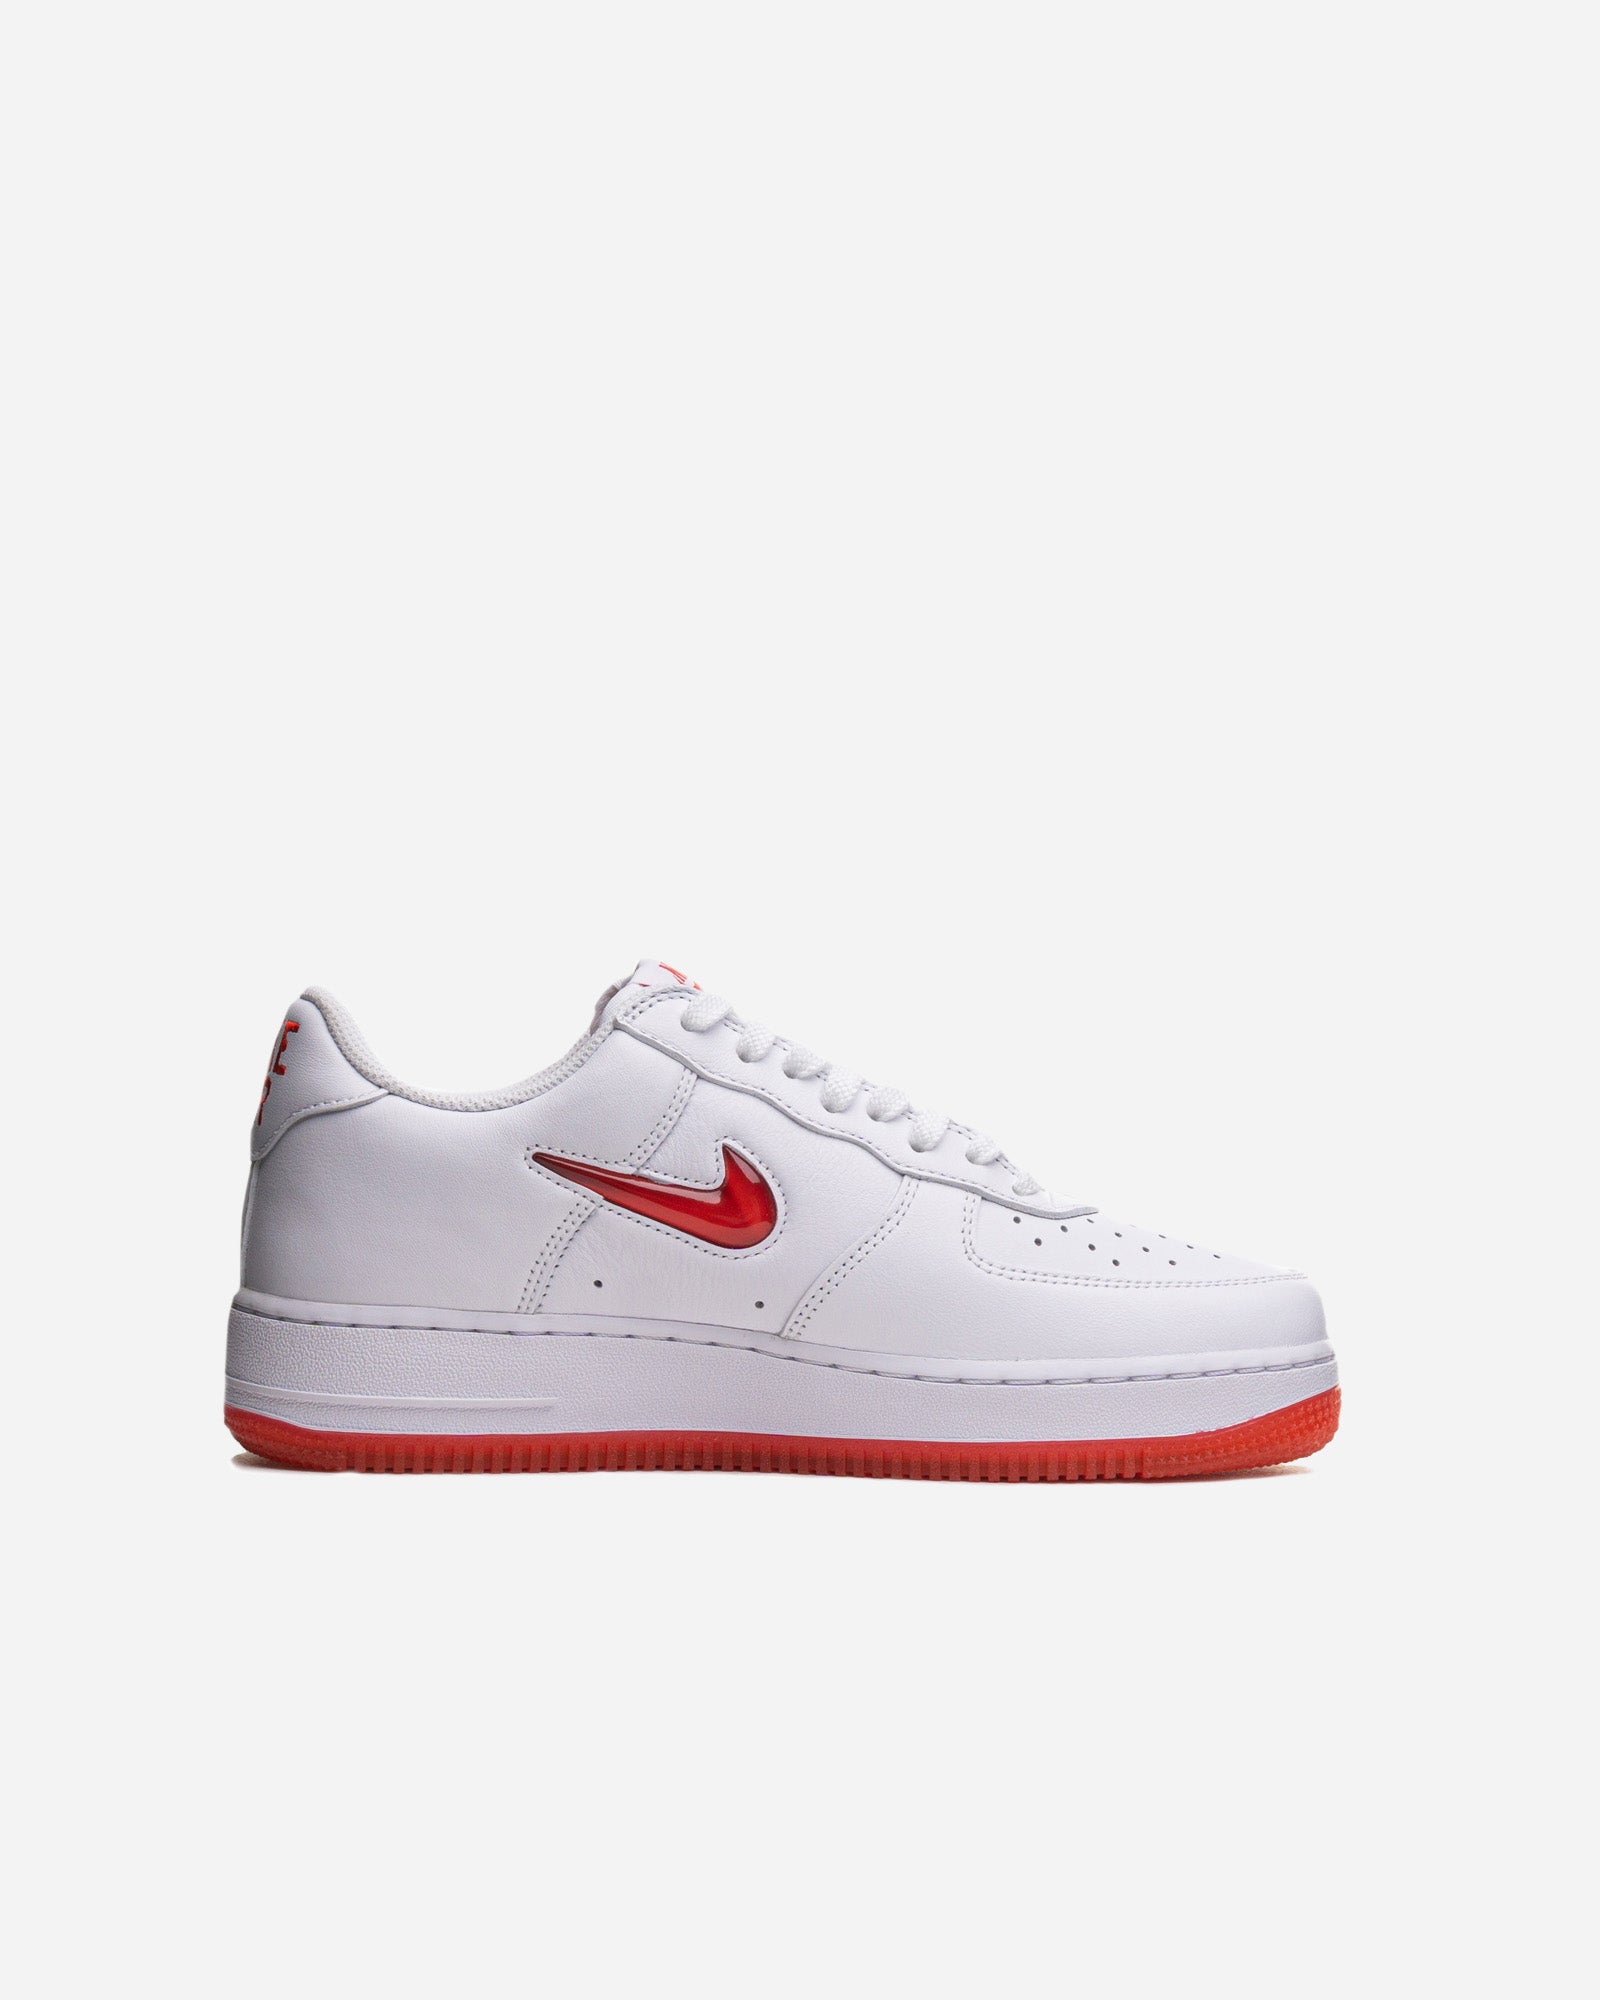 Nike Air Force 1 Low Retro "White / University Red" image